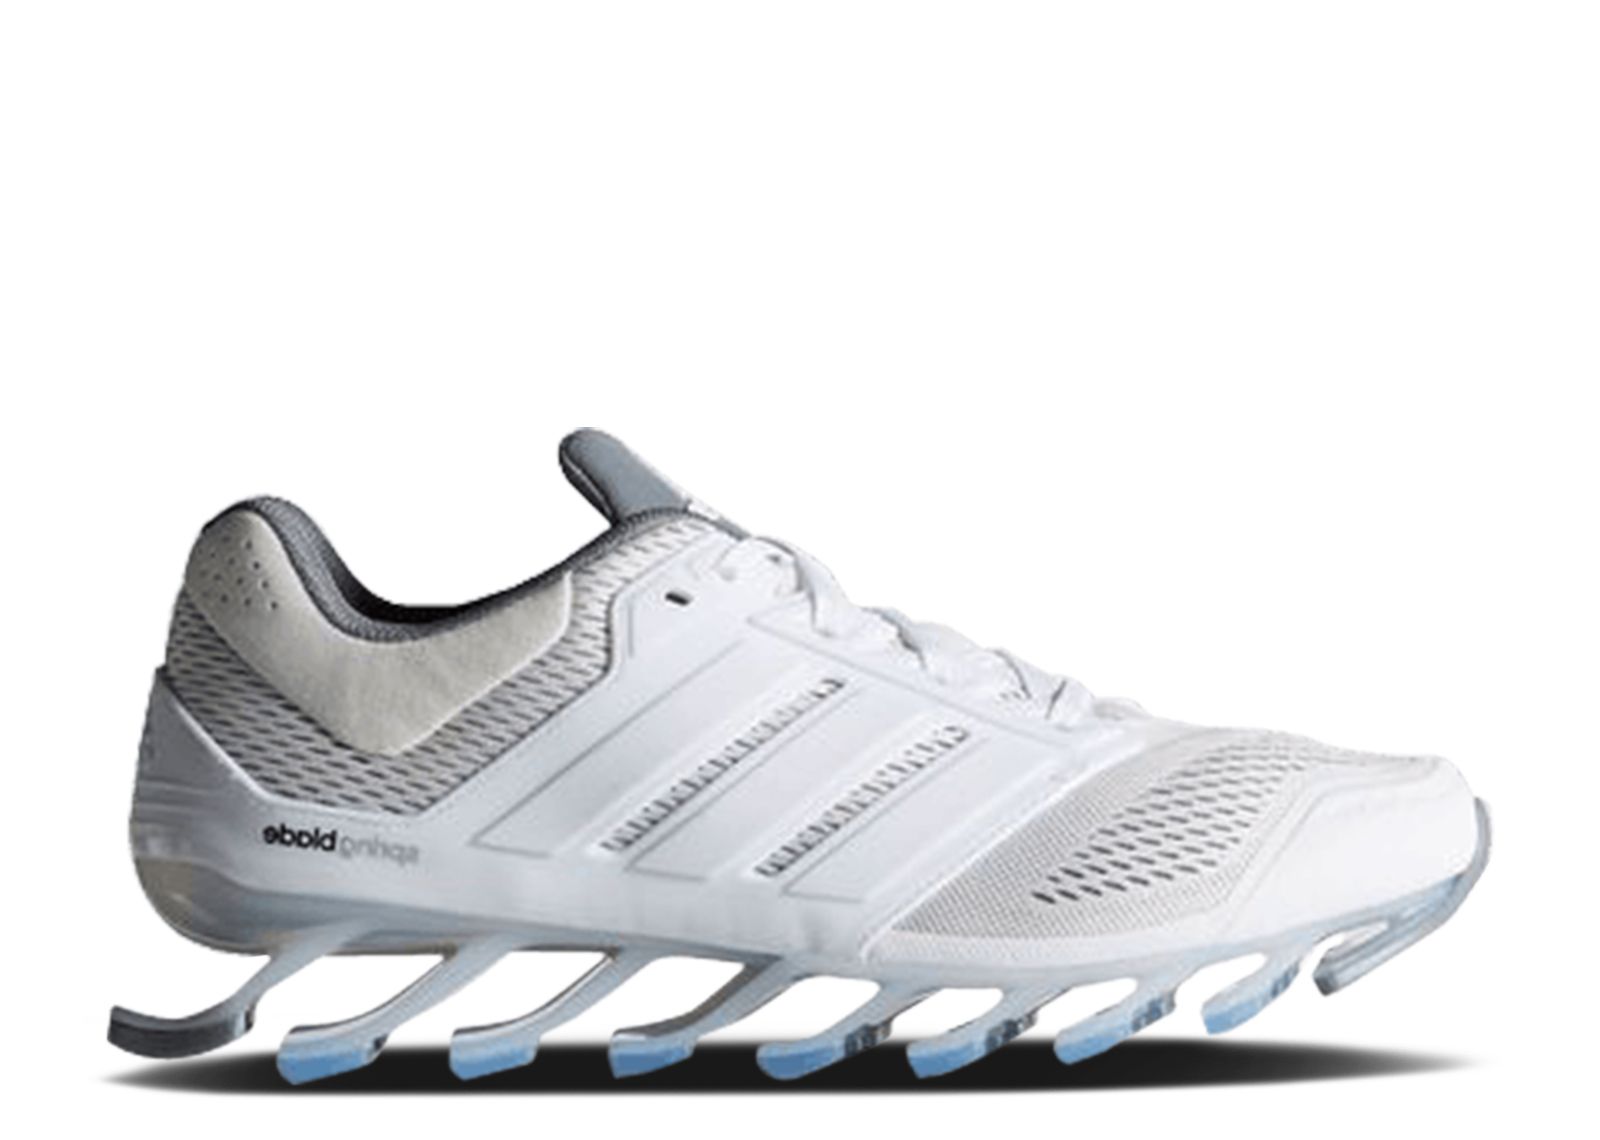 Springblade Drive Shoes - Adidas - C75662 - running white ftw